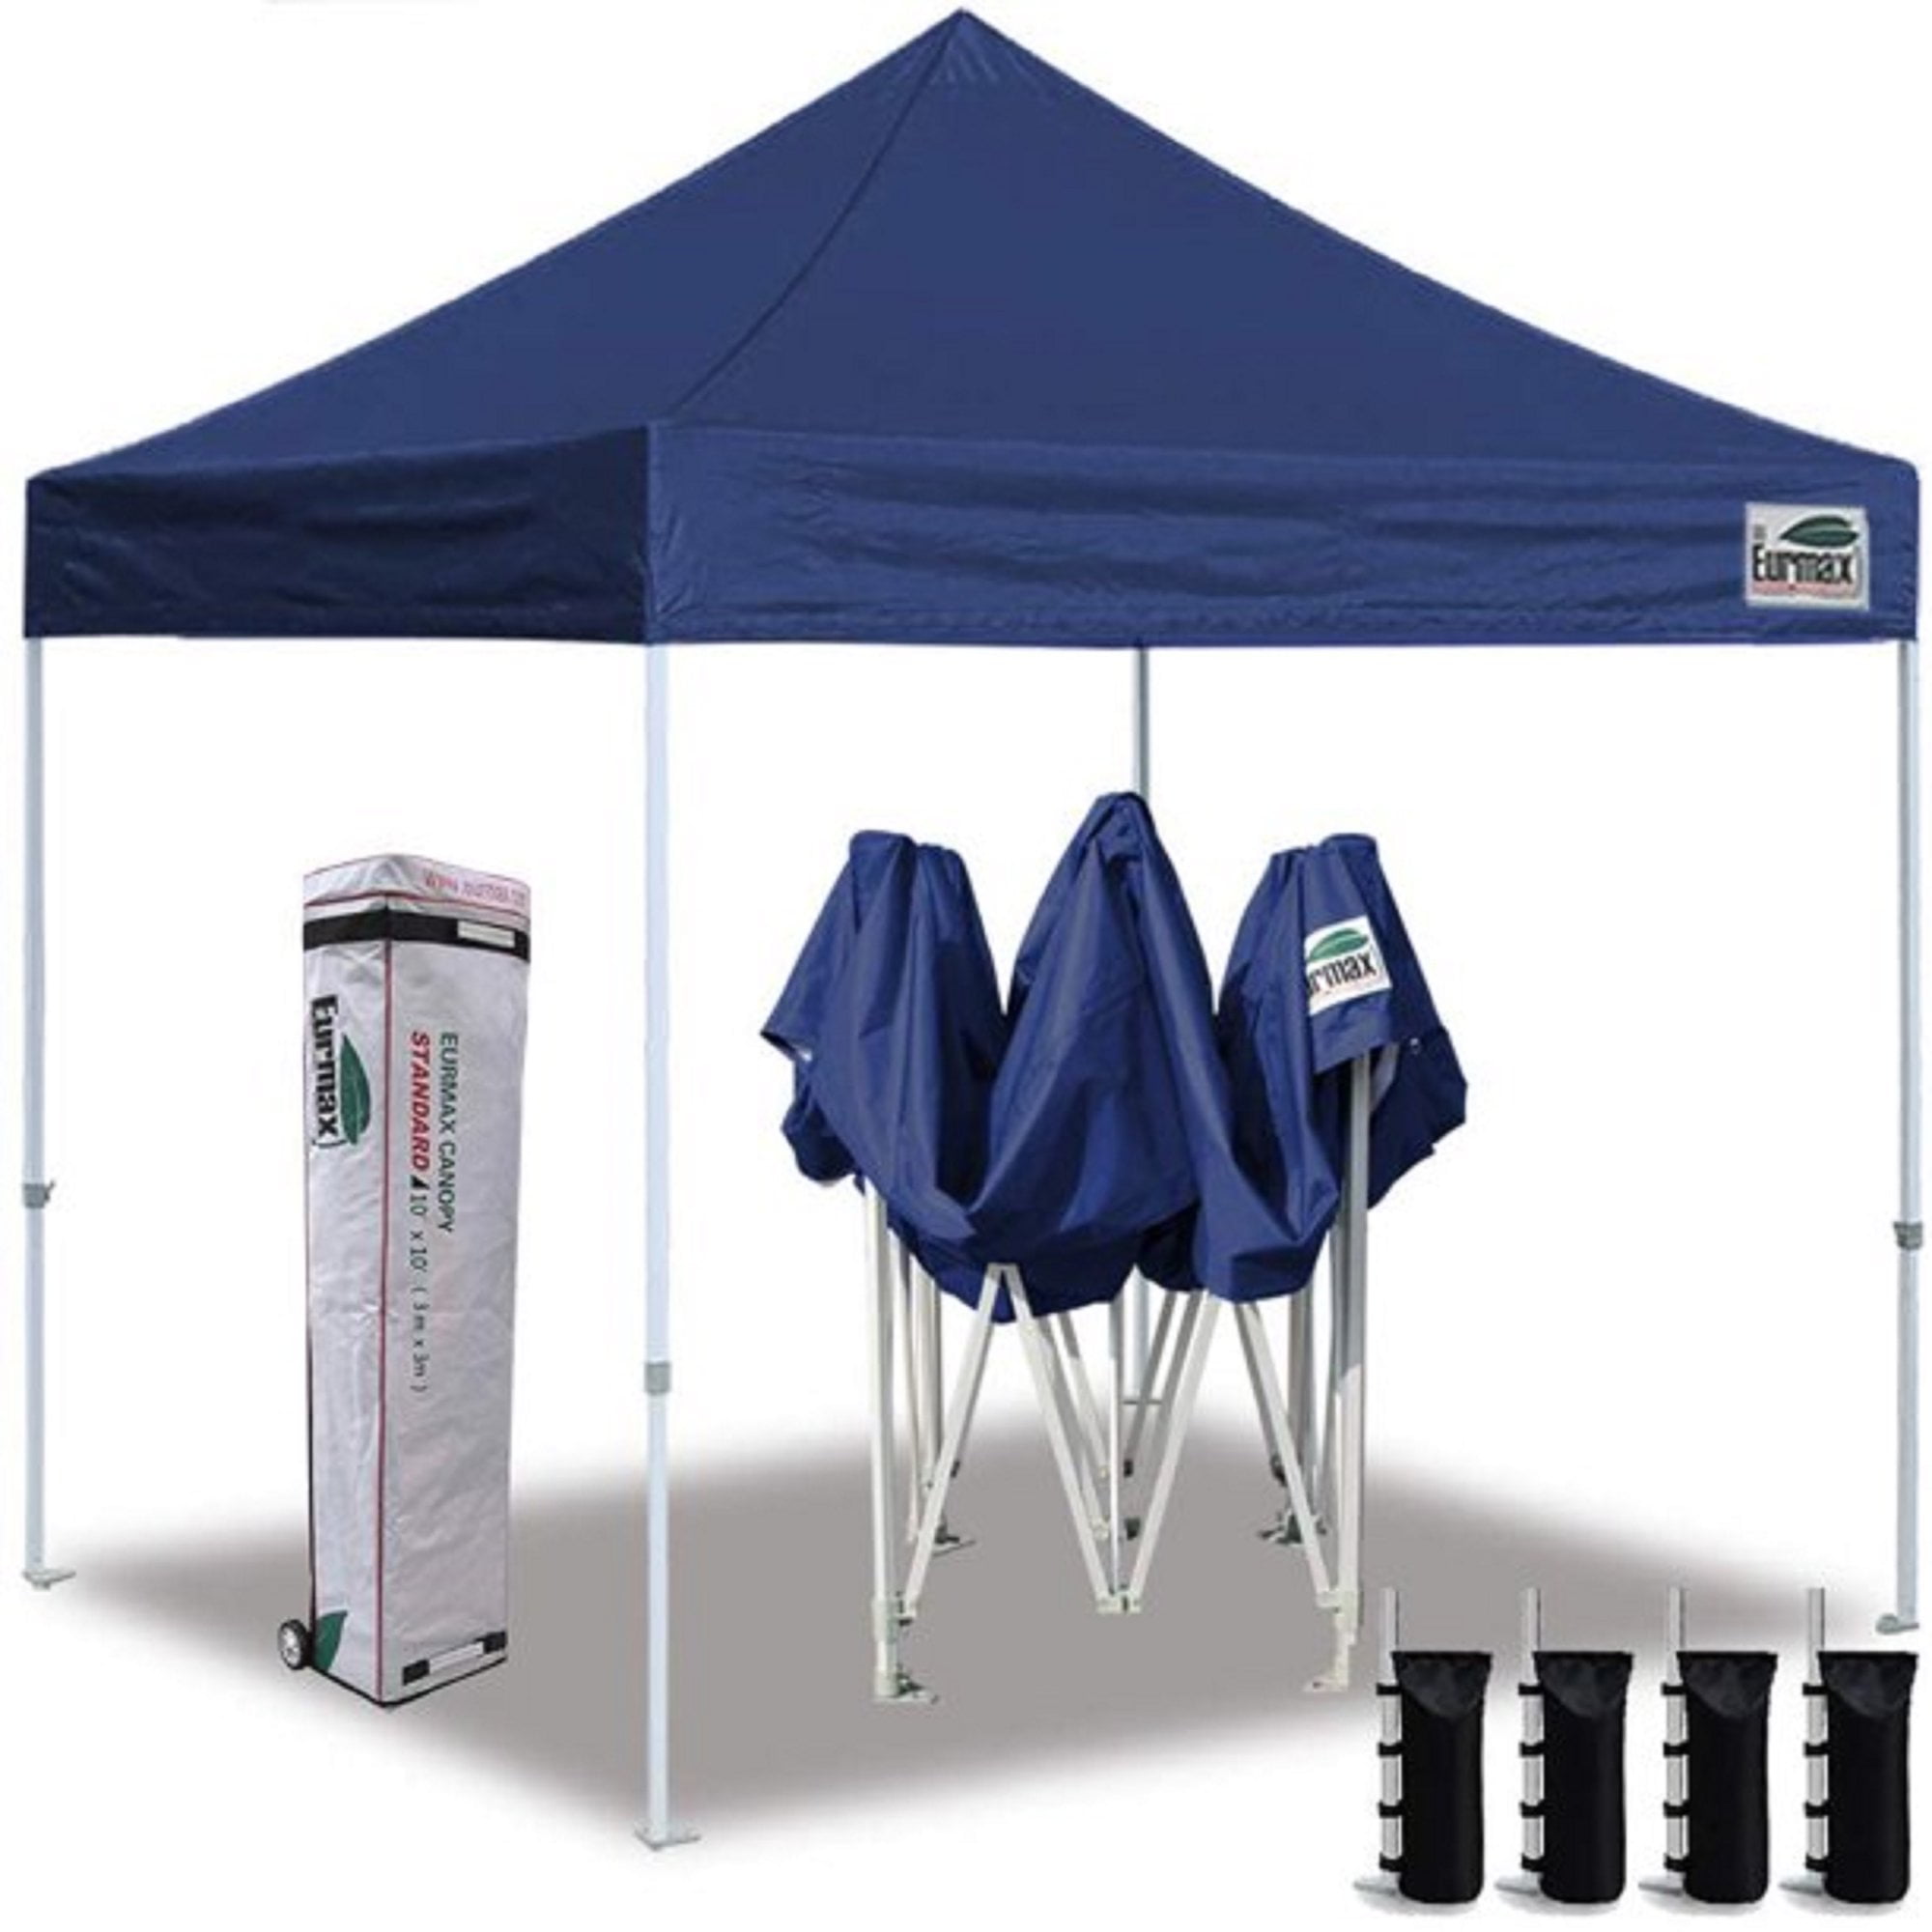 Bonus 4 SandBags 3 Cross-Bar Striped Blue Eurmax 10x10 Ez Pop-up Booth Canopy Tent Commercial Instant Canopies with 1 Full Sidewall & 3 Half Walls and Roller Bag